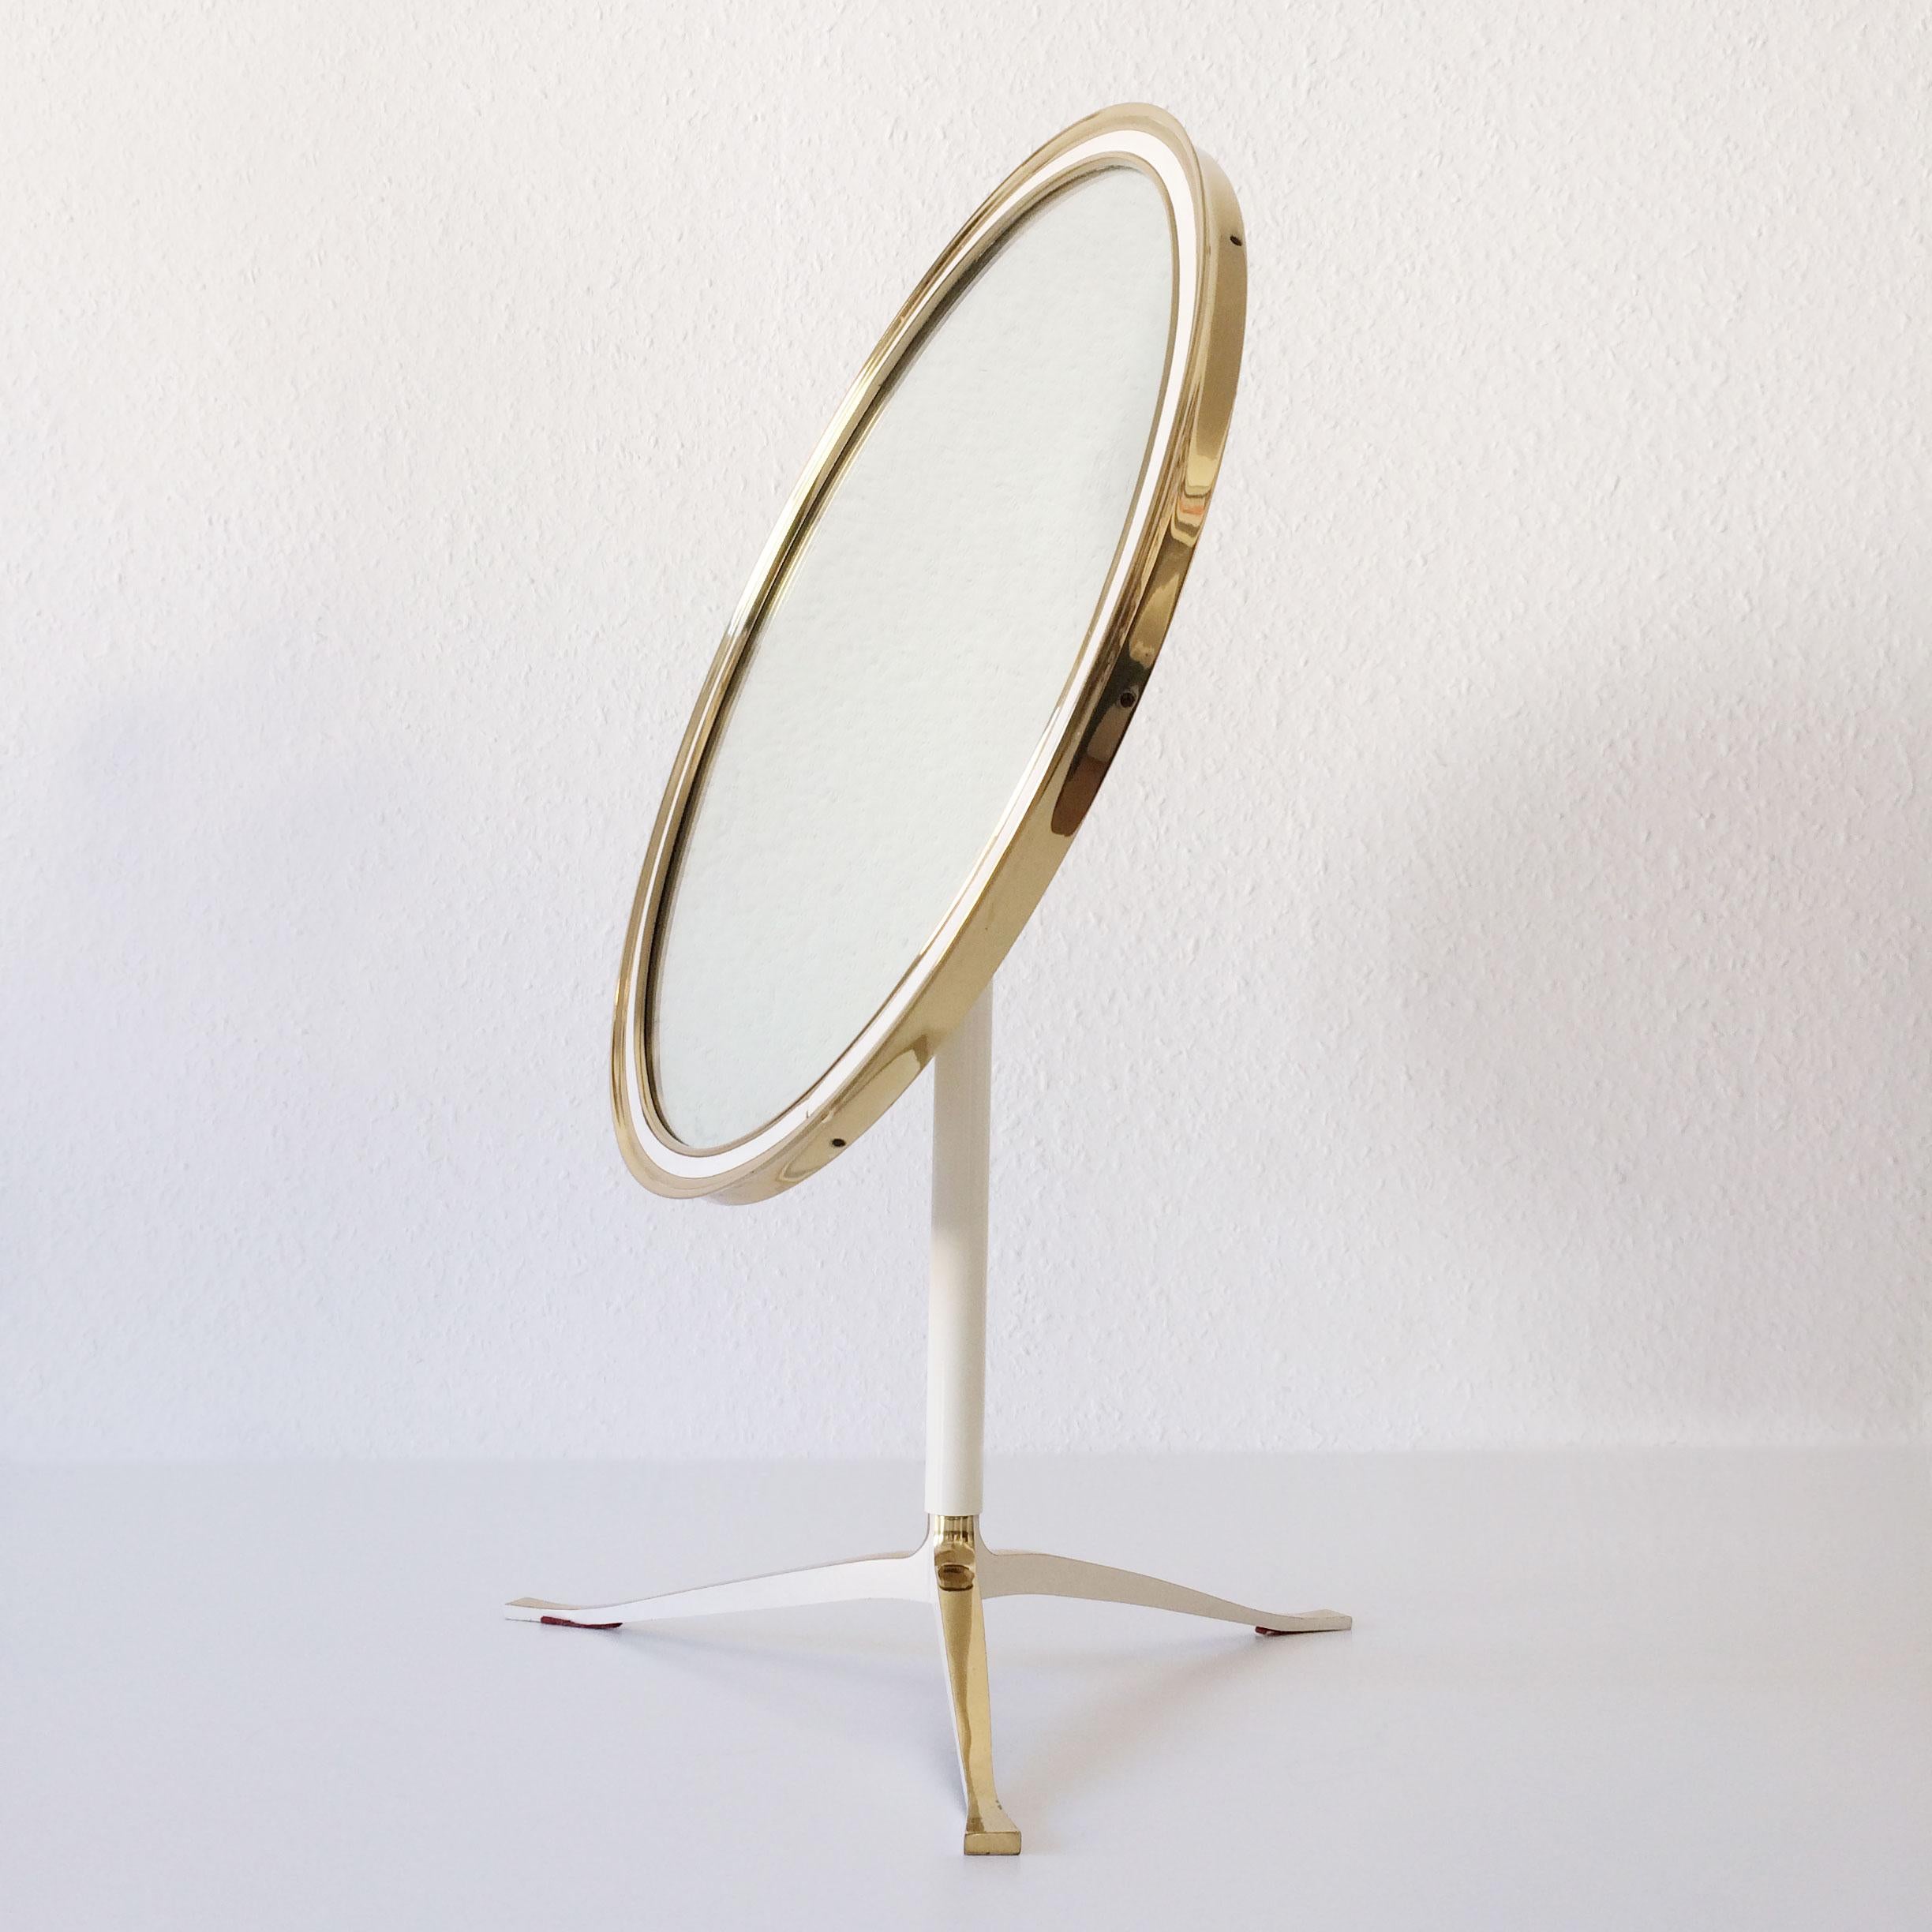 Extremely rare and decorative Mid-Century Modern table mirror with brass frame. Manufactured by Vereinigte Werkstätten München, Germany in 1960s.

This large make-up mirror is executed in solid brass and can be adjusted easily in wished position.